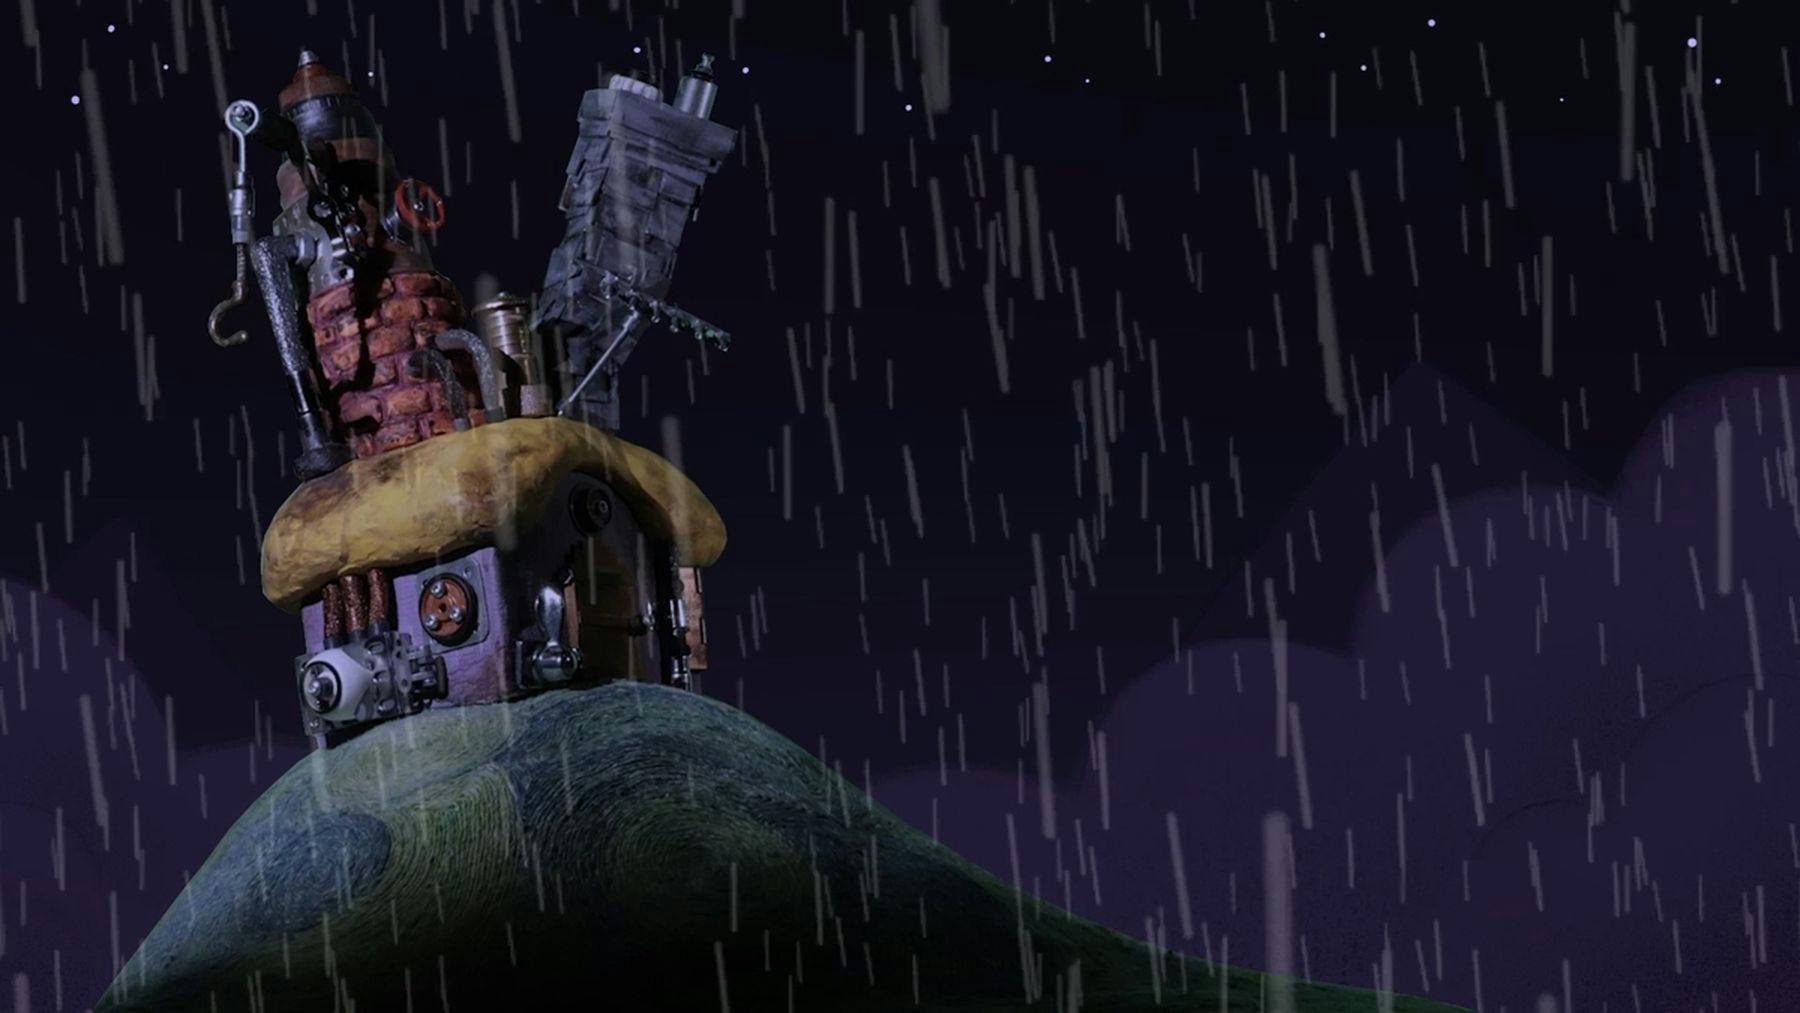 A very dark cartoon of a building on a hill in the rain. The building appears to be made of loose parts, including a rake and a metal hook.